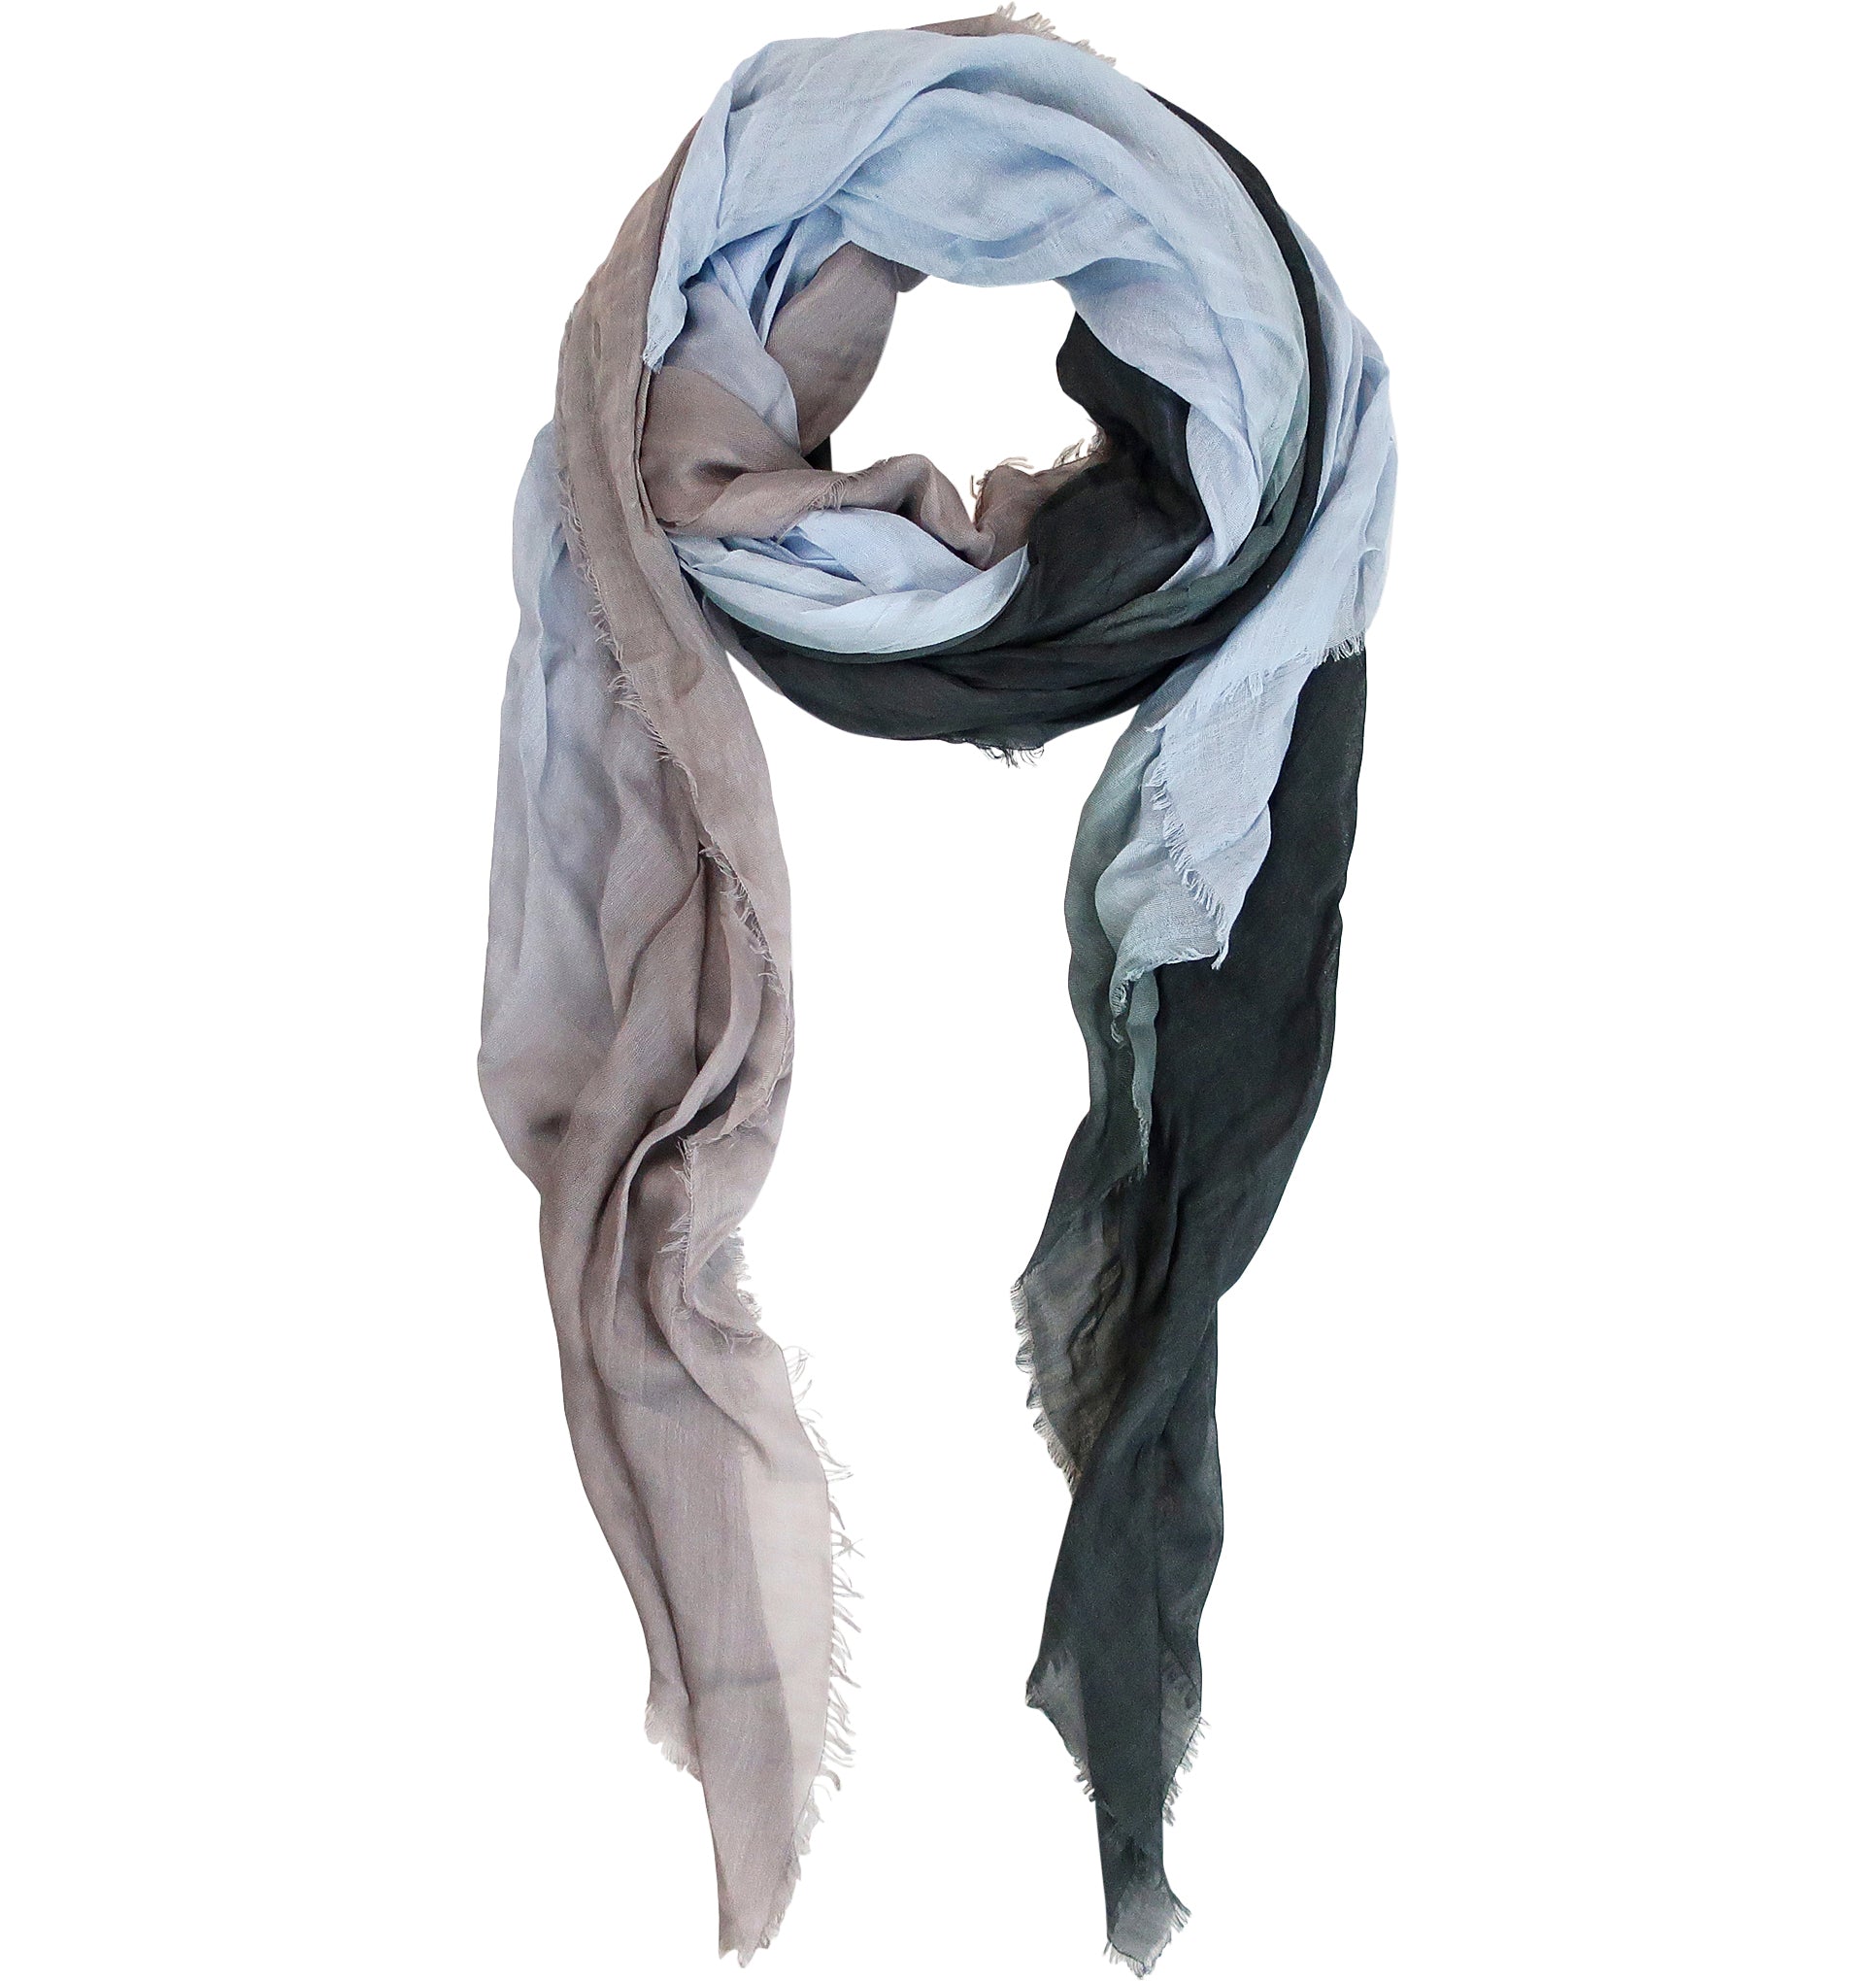 Blue Pacific Dream Cashmere and Silk Scarf in Grey Blue and Black 47 x 37